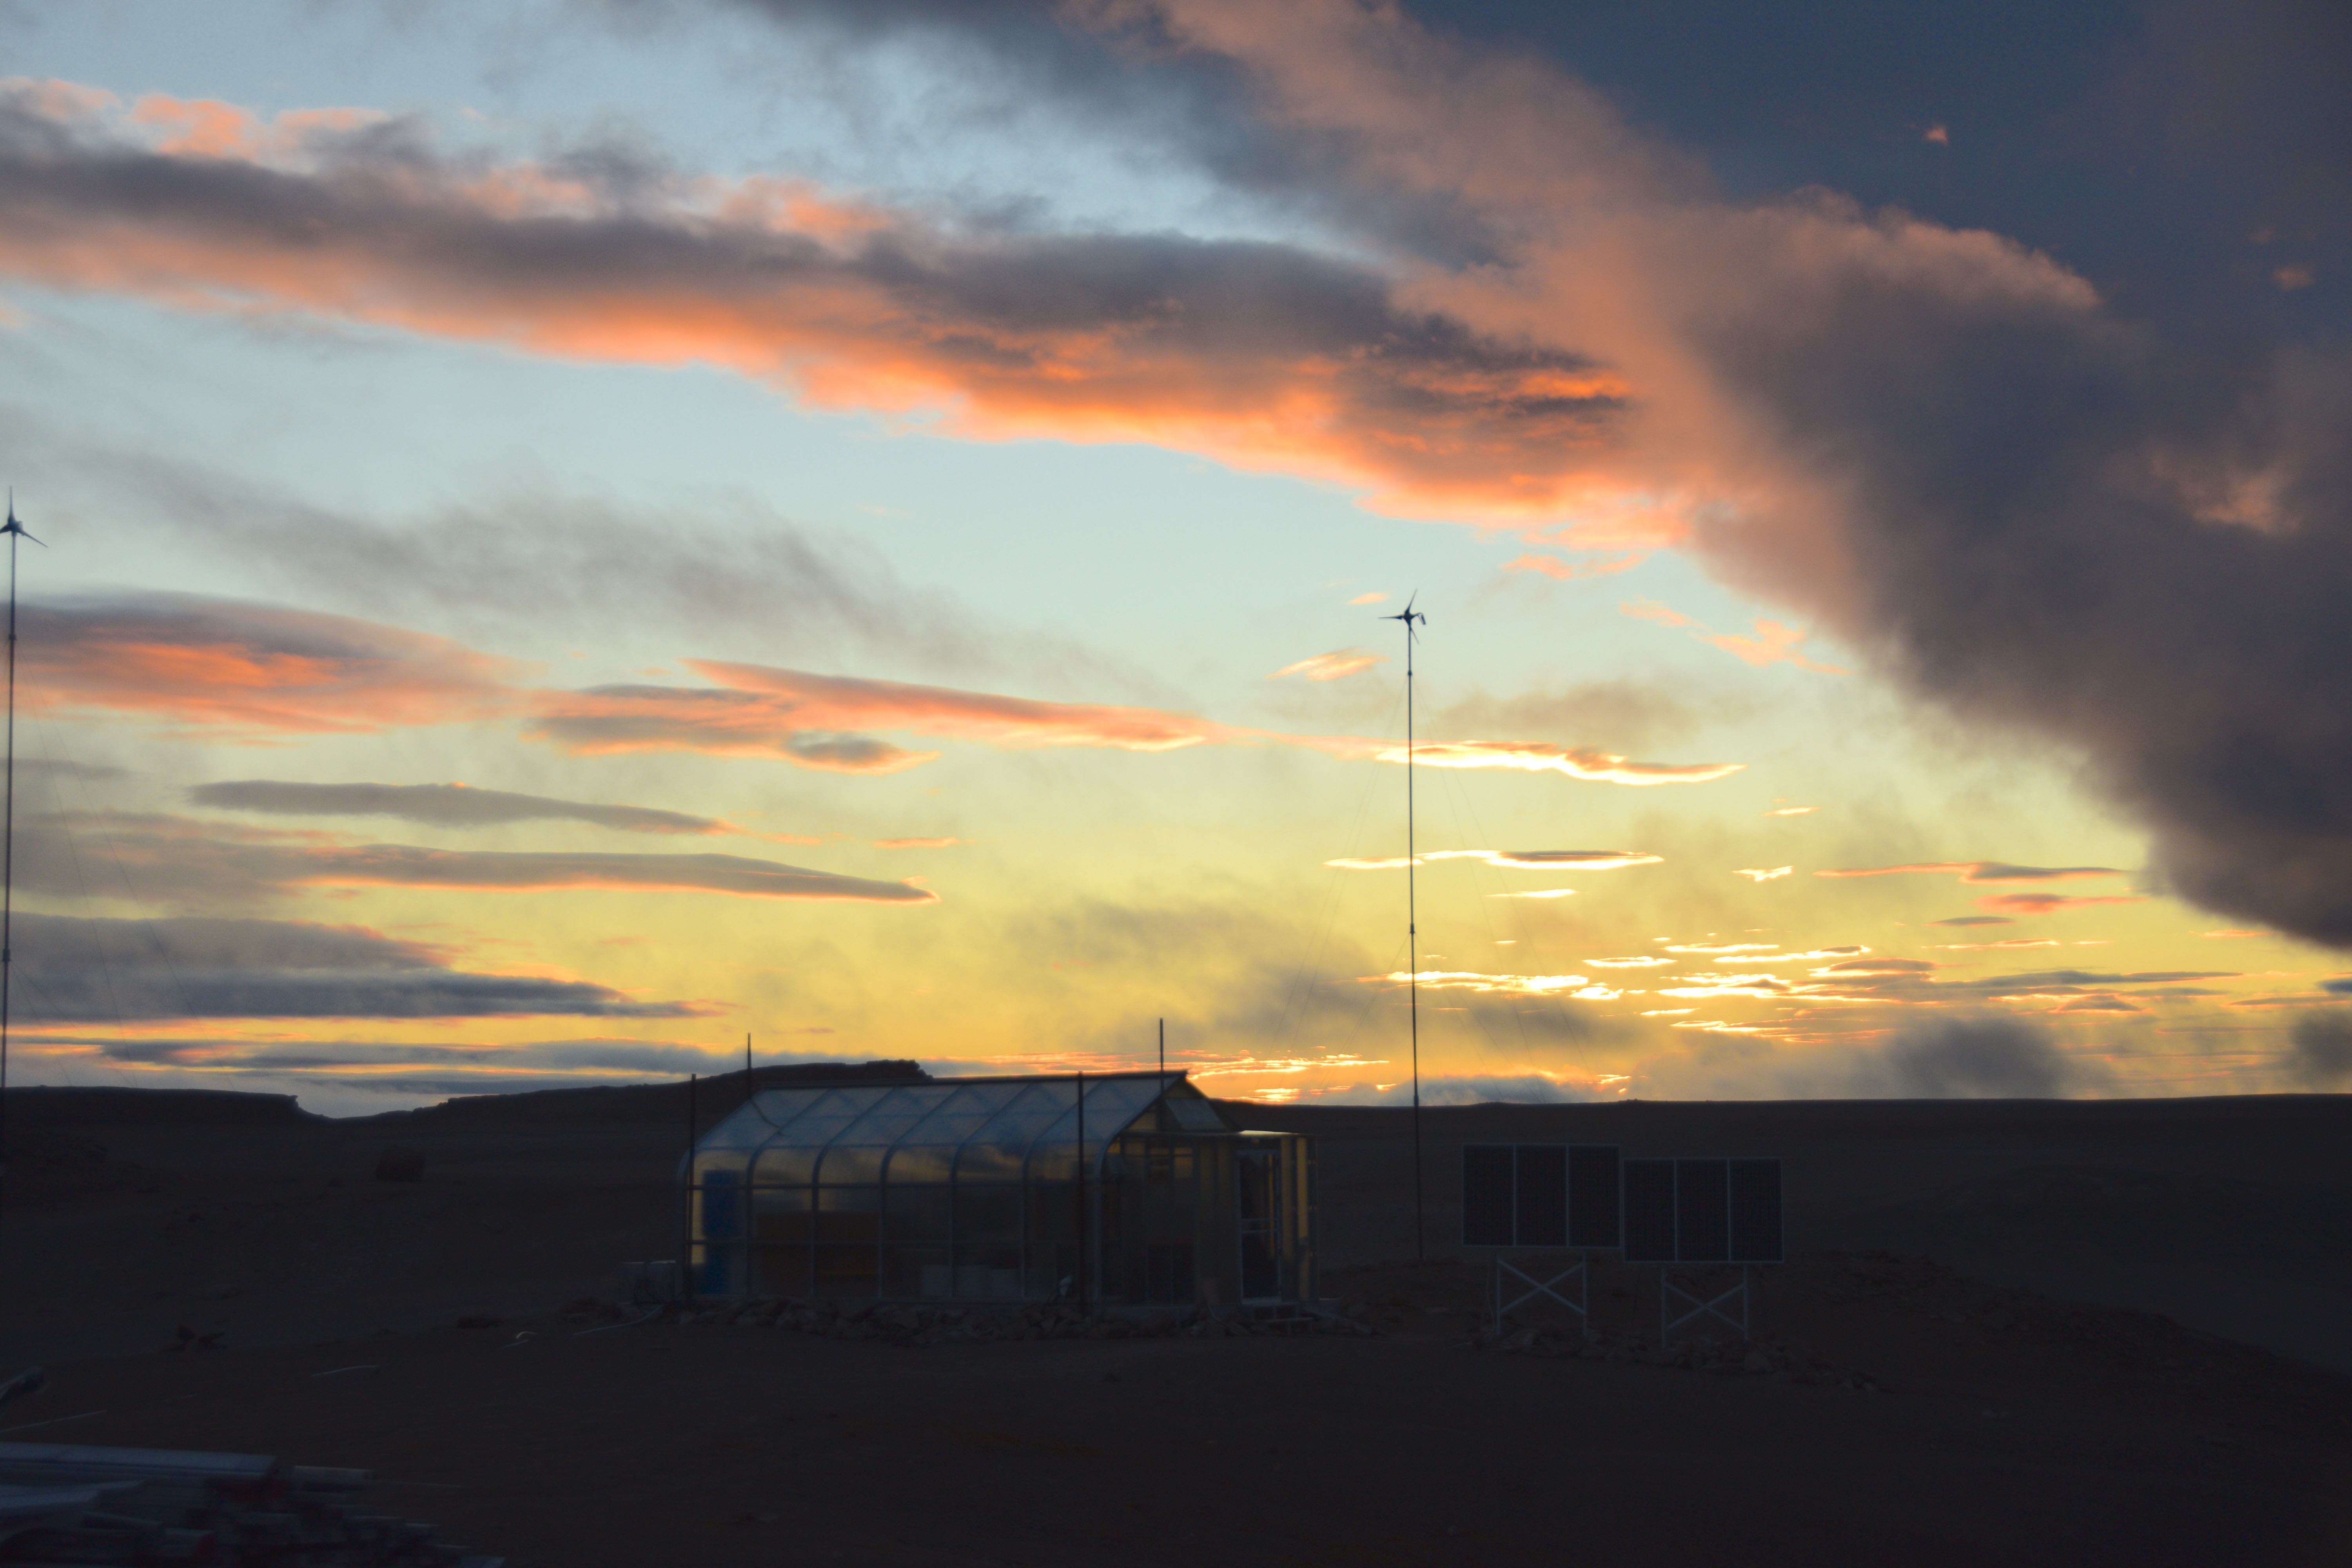 A typical sunset, 11 p.m. overlooking the HMP greenhouse.